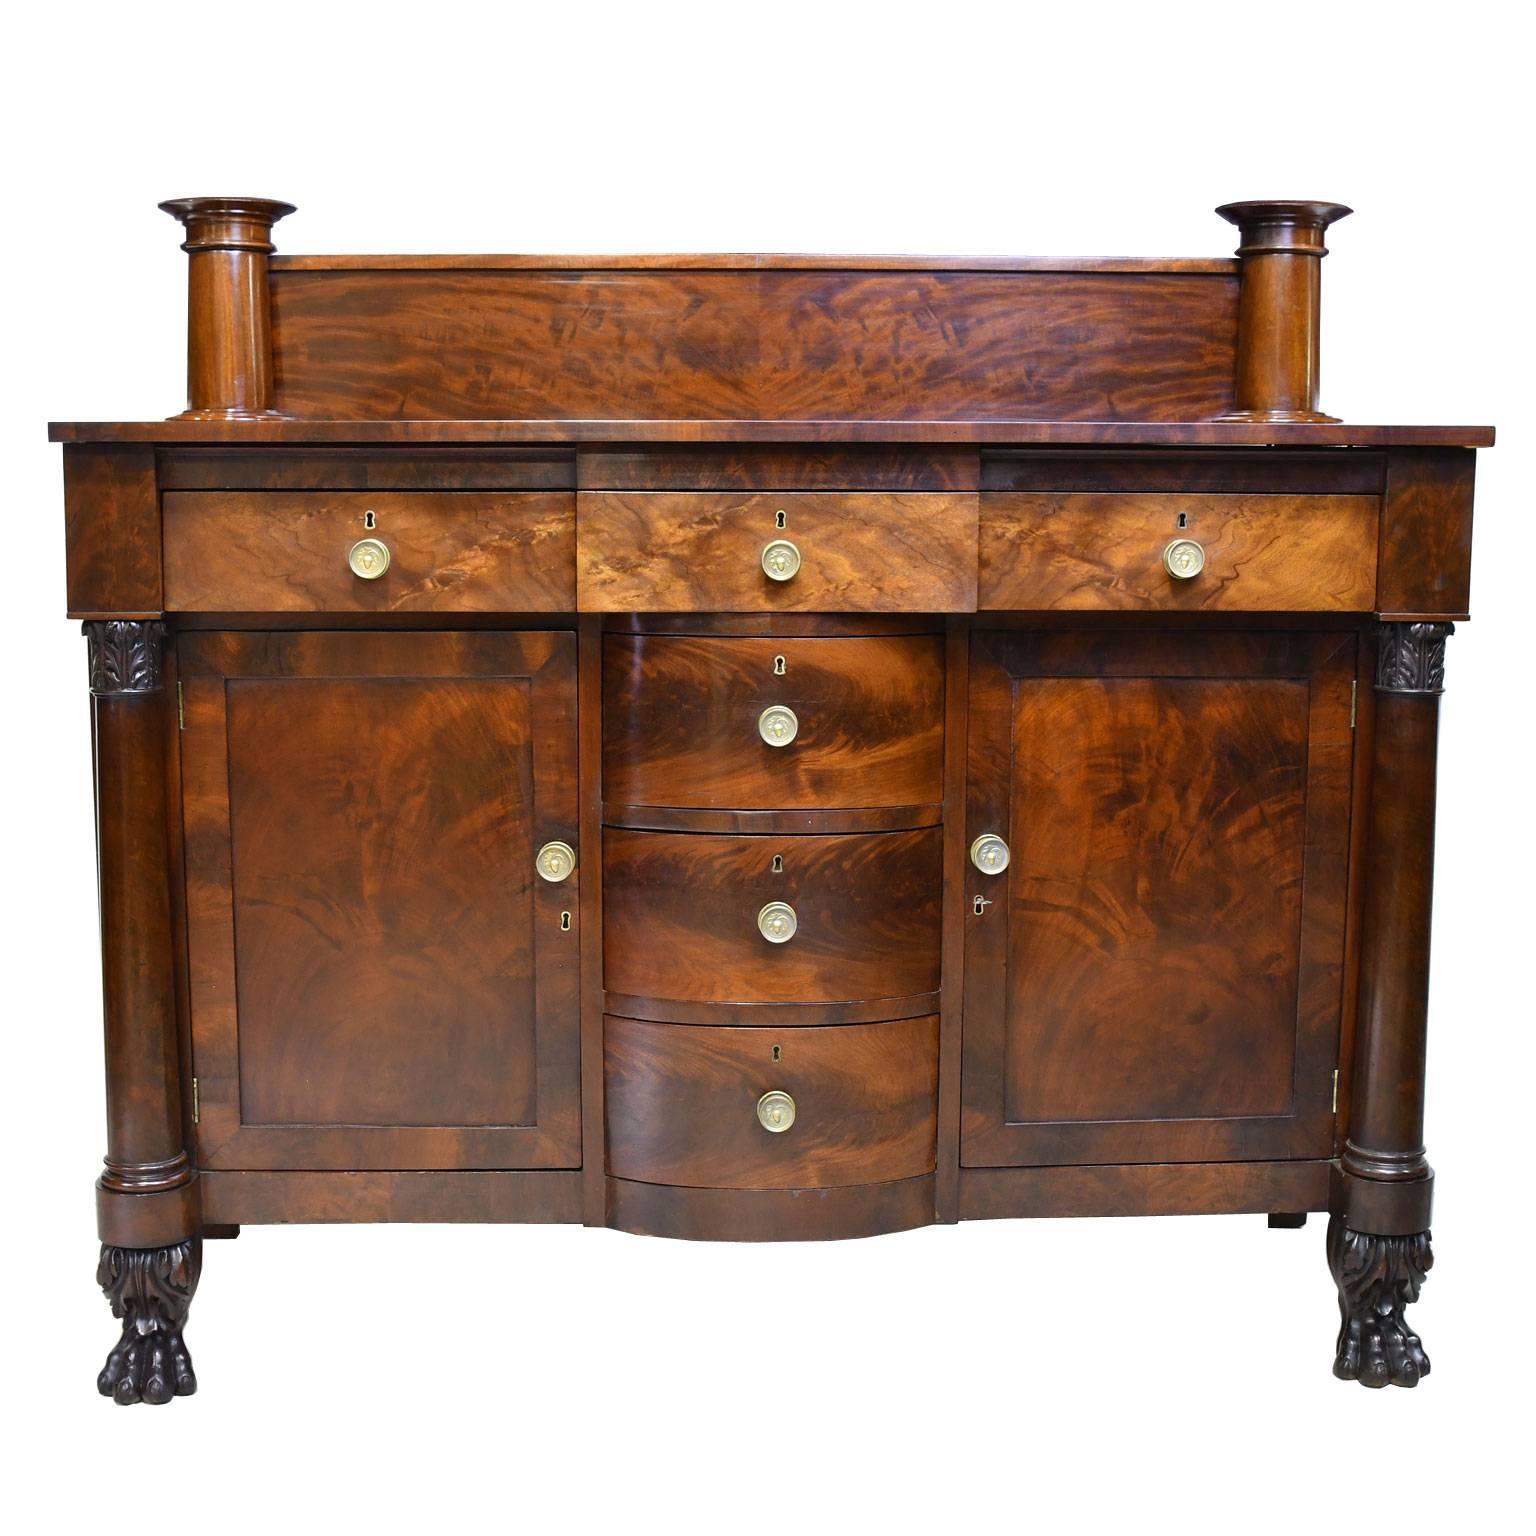 A beautifully-proportioned American Empire sideboard in a superb selection of crotch-cut and flat cut Cuban mahogany veneers. Drawer sides and bottoms are in poplar and the secondary wood is northern white pine. Flight of three drawers in the center